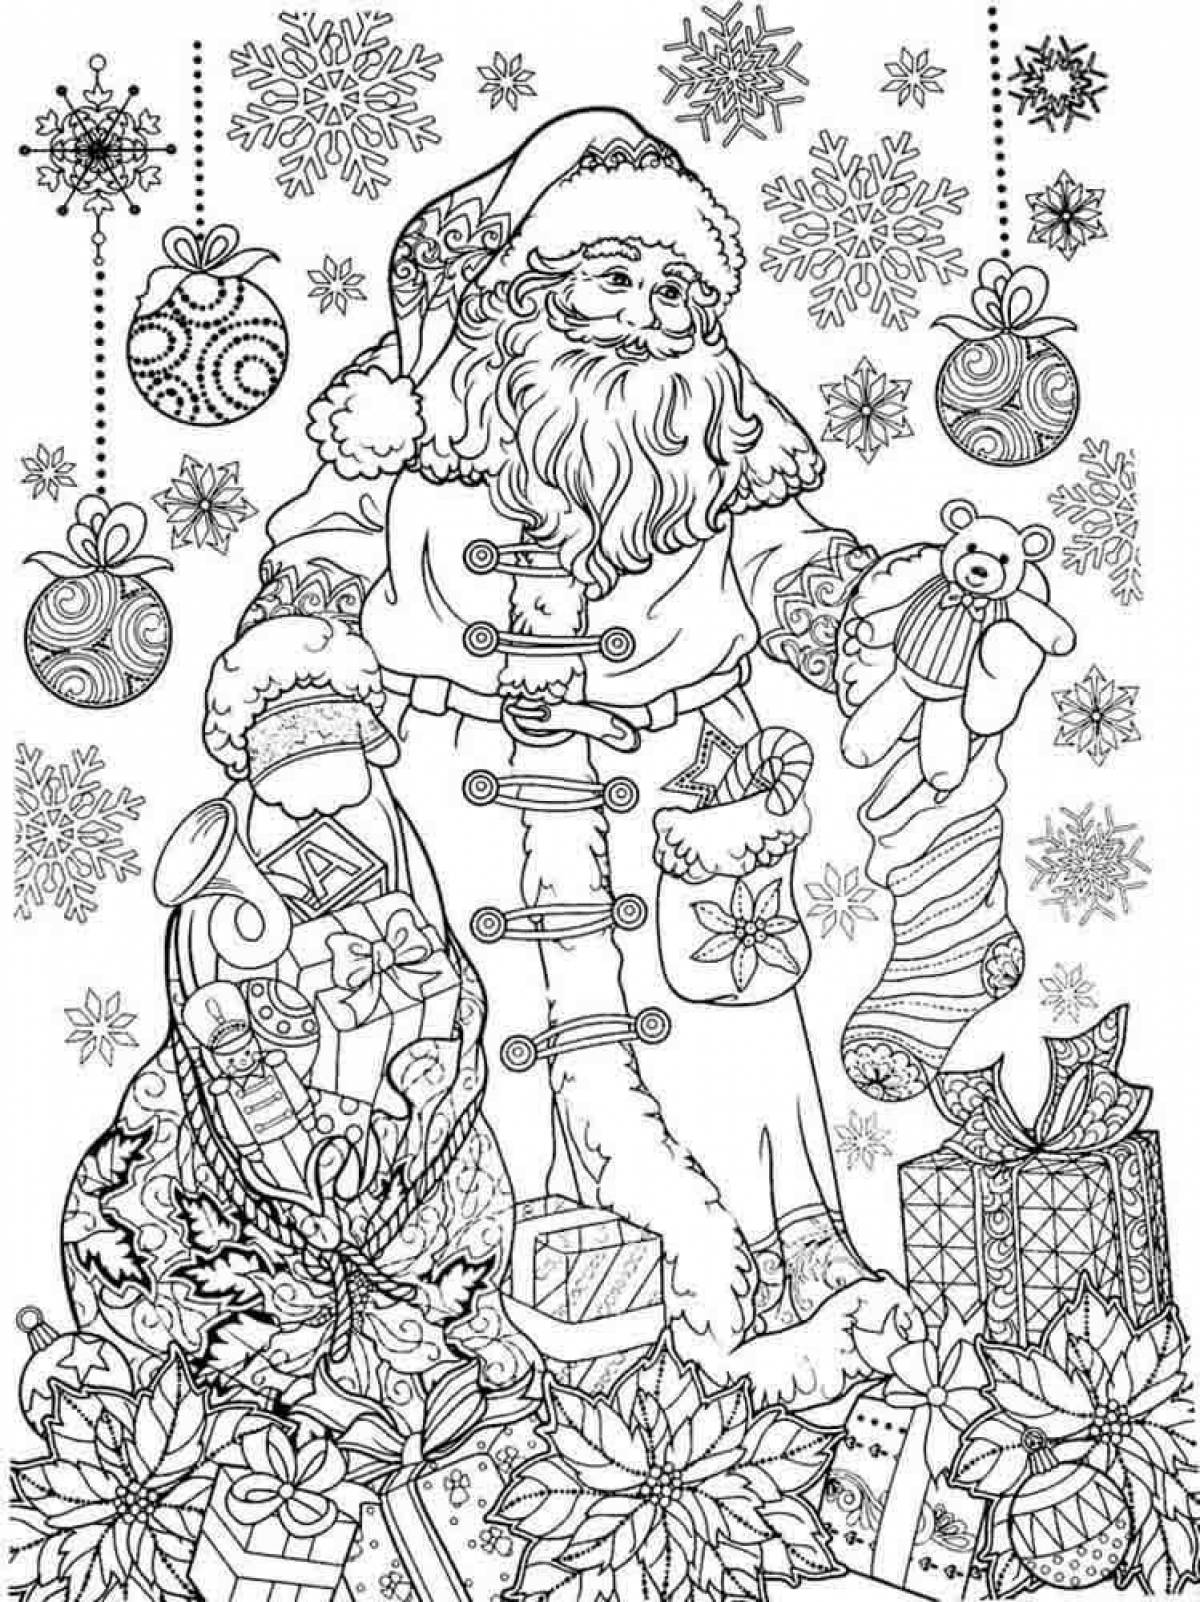 Live anti-stress Christmas coloring book